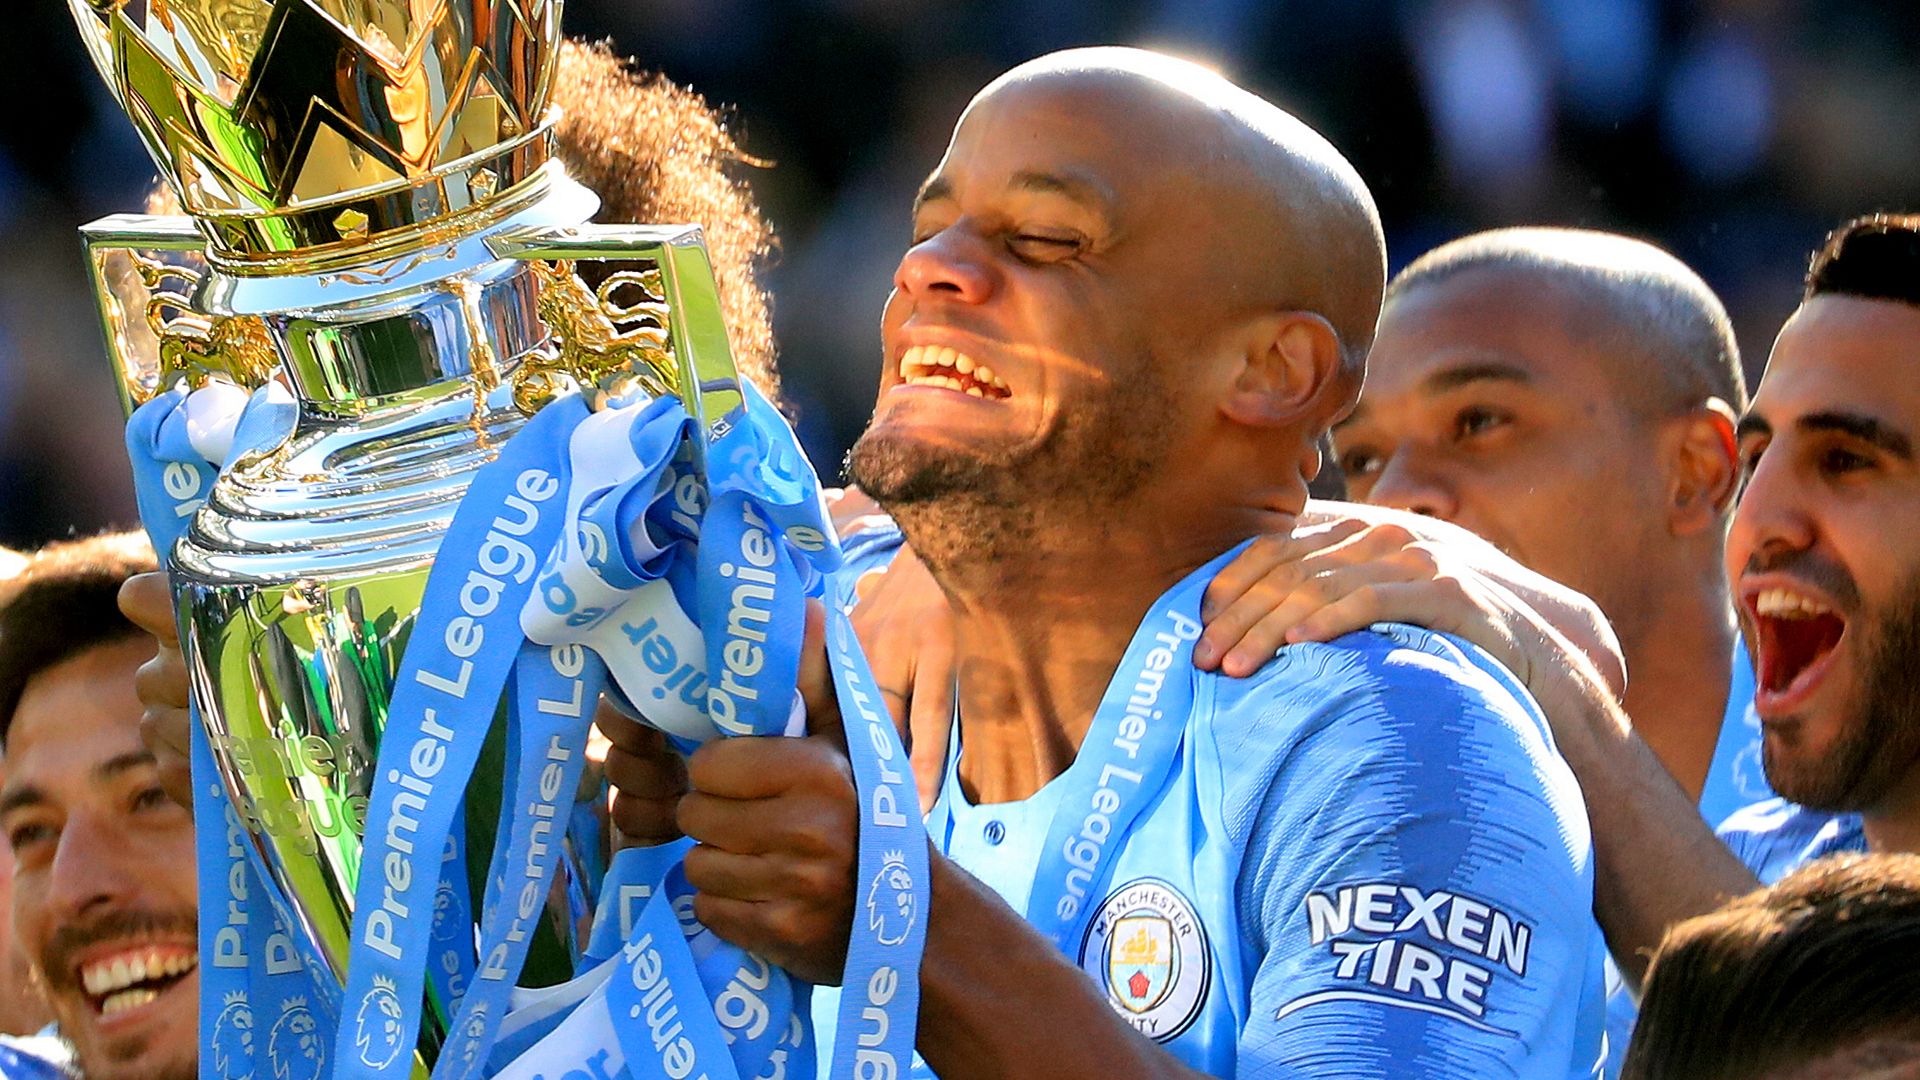 Kompany on City charges: 'I roll my eyes...football can't afford to point fingers'